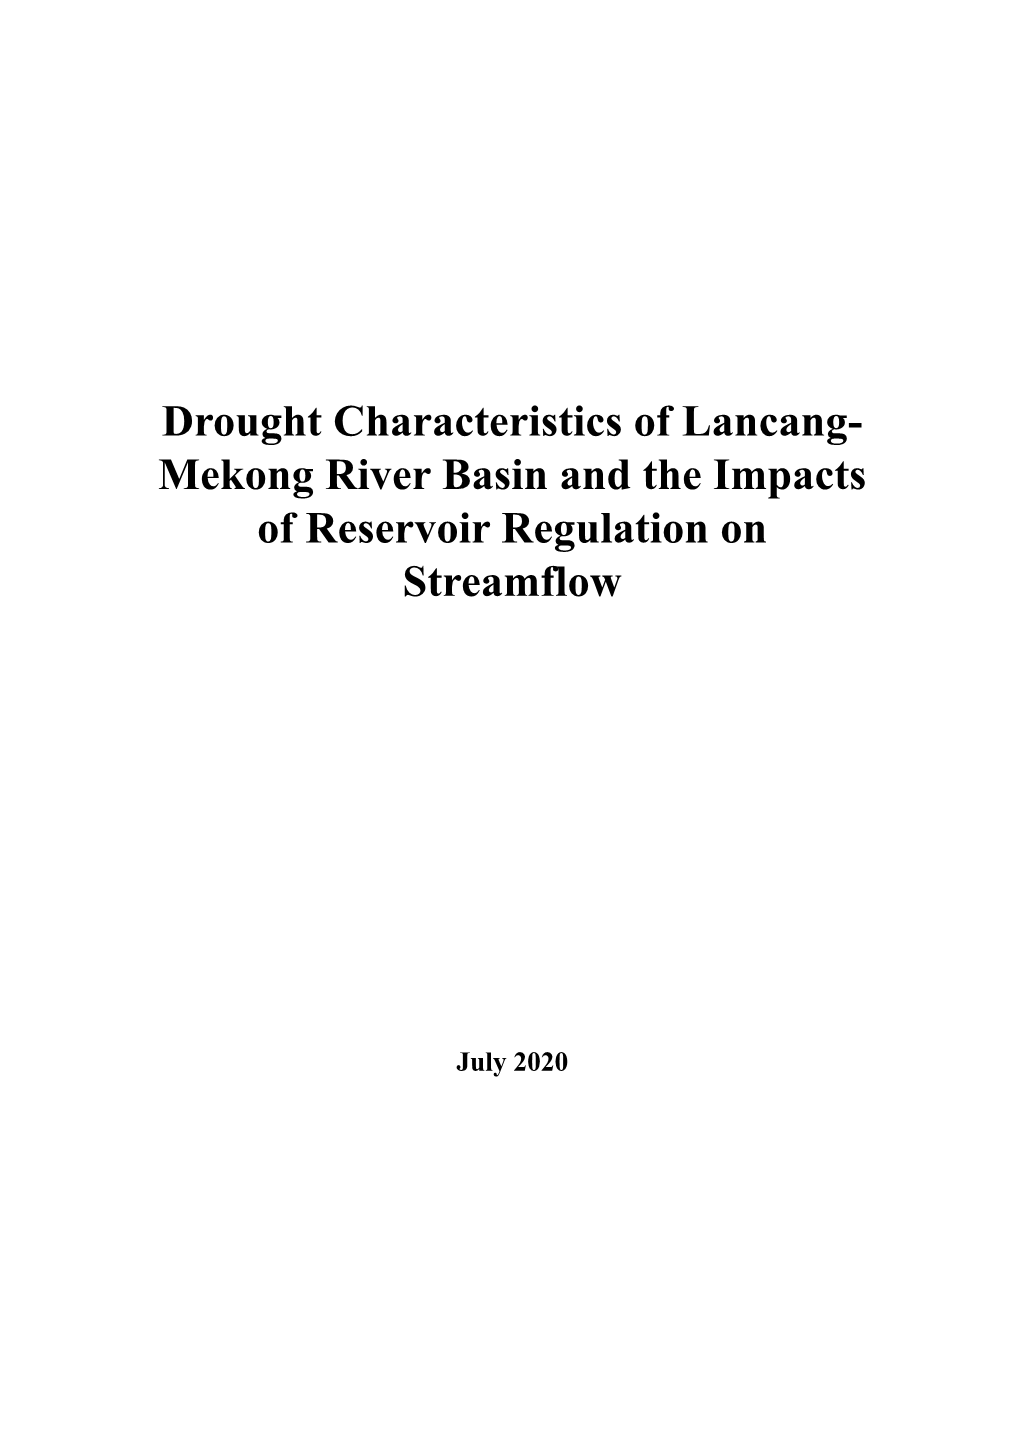 Drought Characteristics of Lancang- Mekong River Basin and the Impacts of Reservoir Regulation on Streamflow